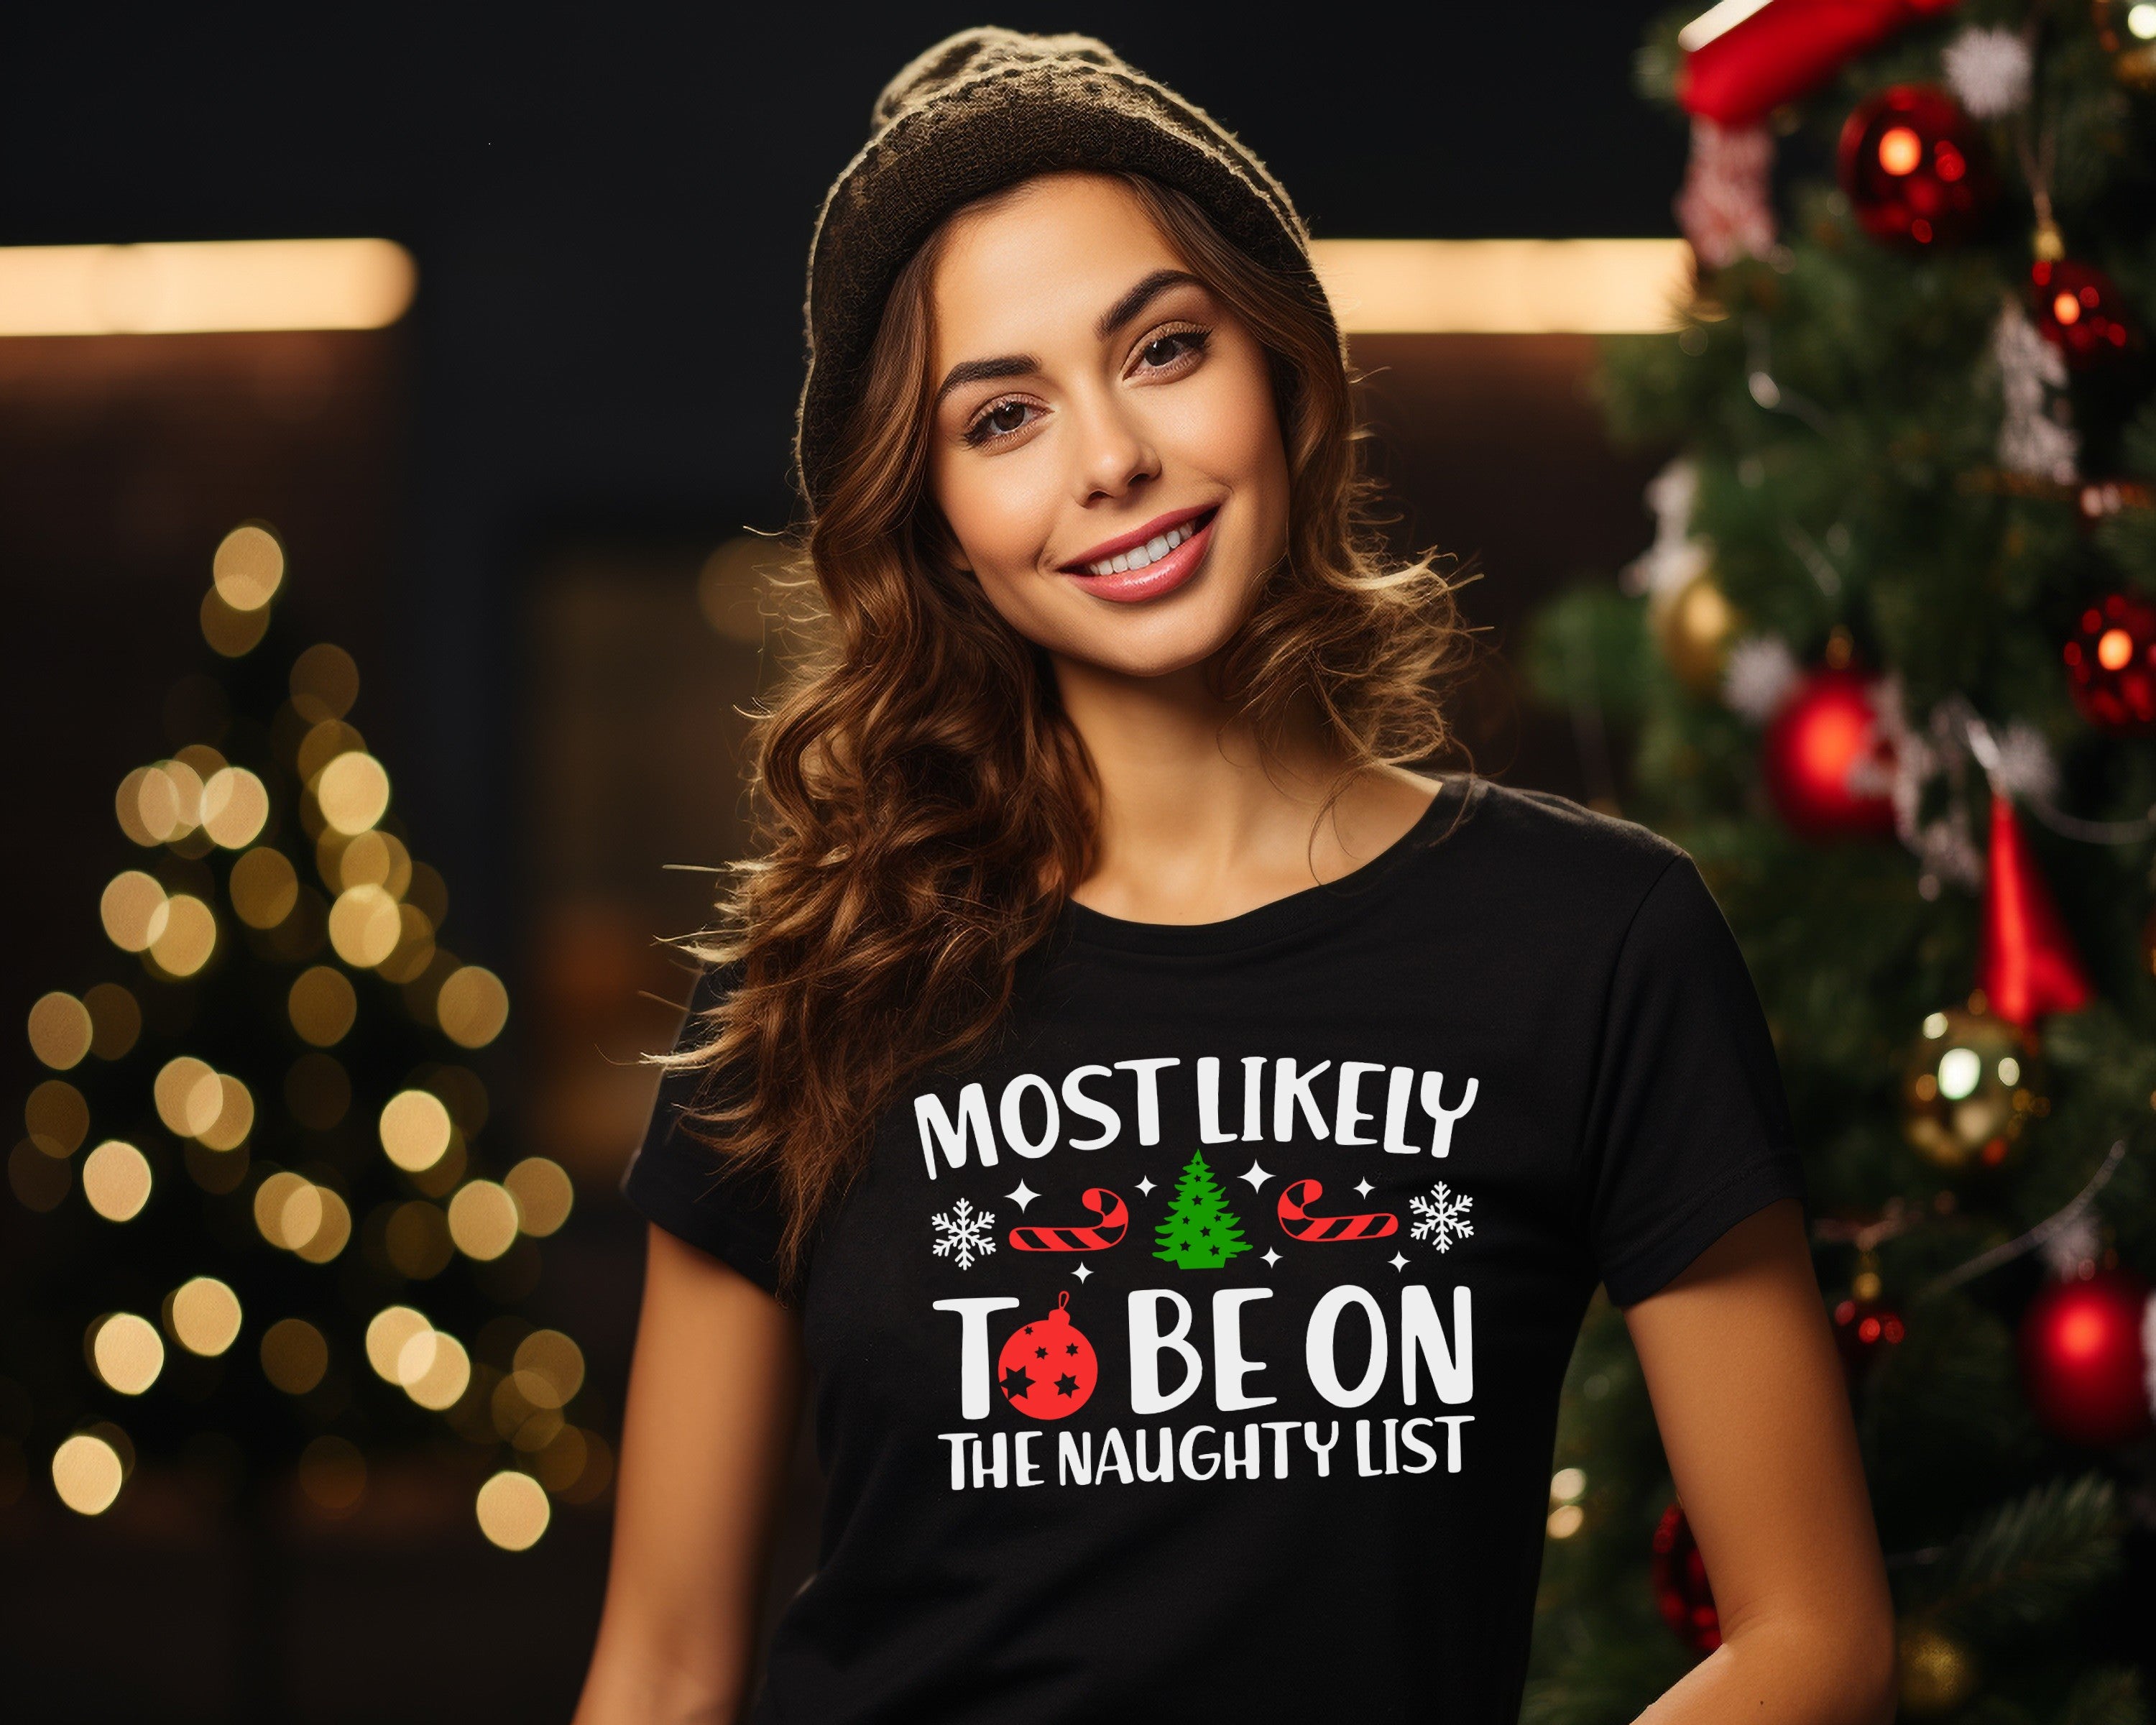 Most Likely To Be on Naughty List T-Shirt